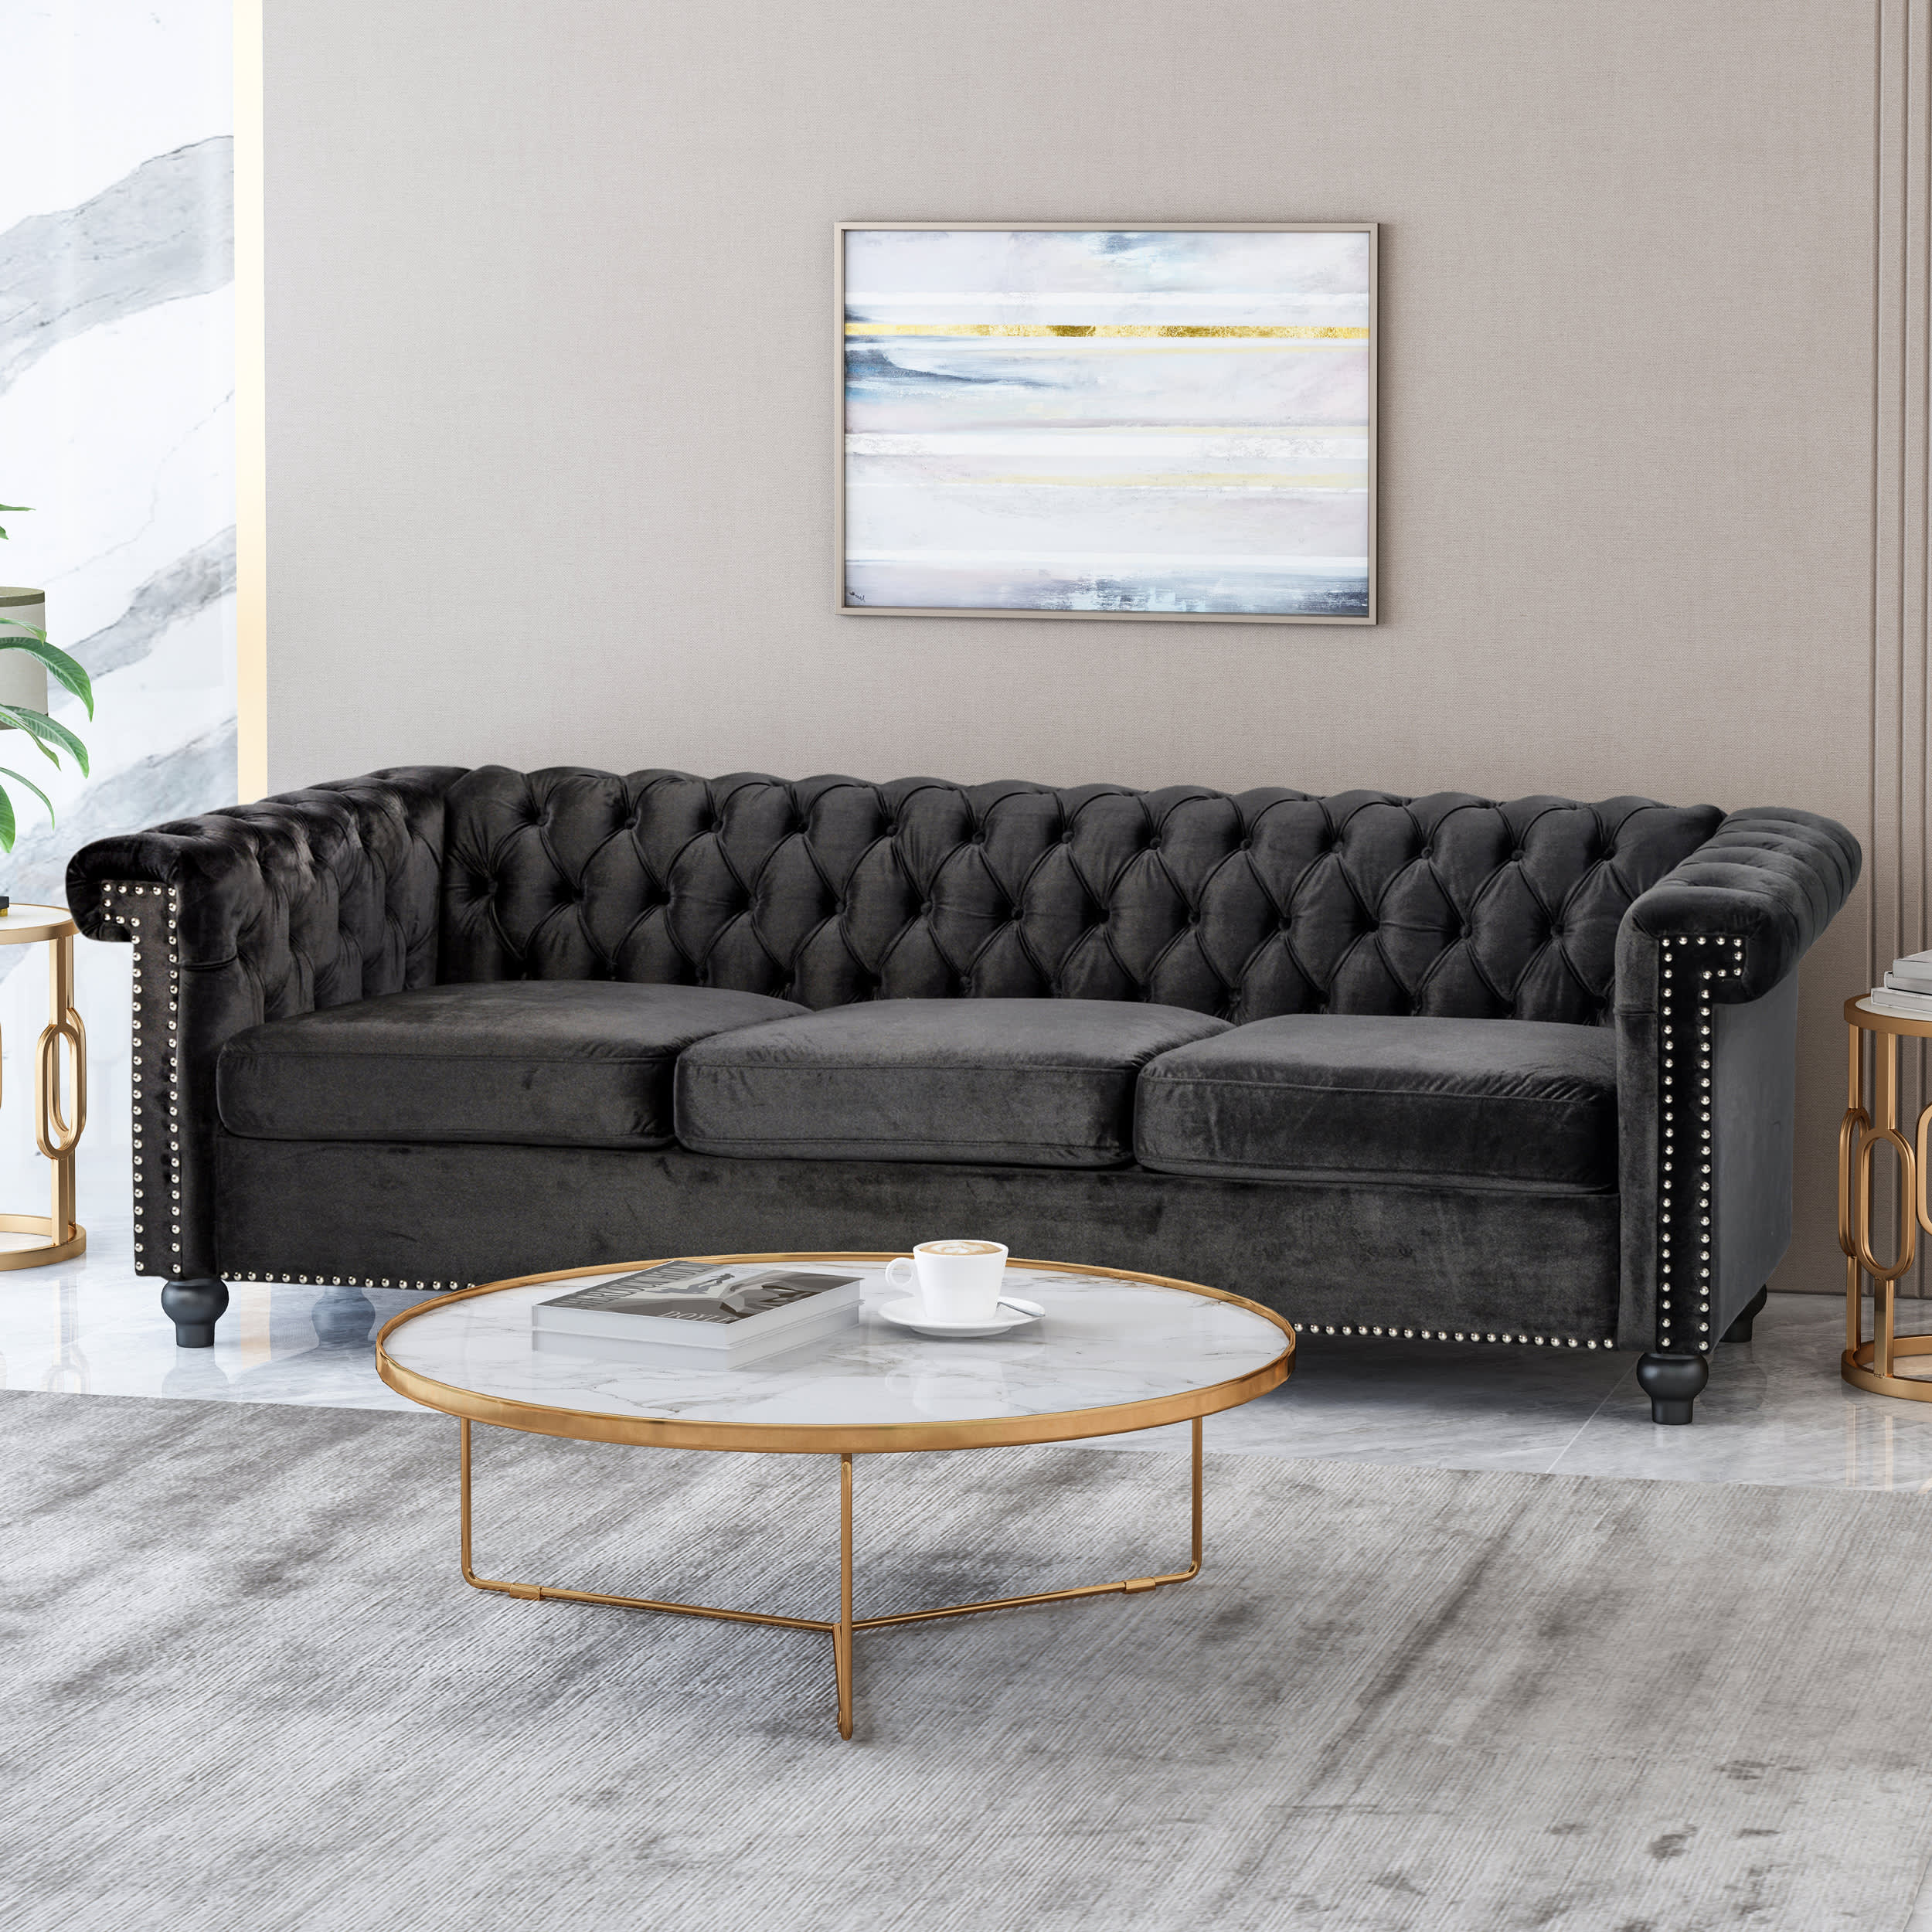 Featured image of post Grey Velvet Tufted Couch / Give your four legged friends the pampering they deserve with this superbly stylish tufted pet couch.